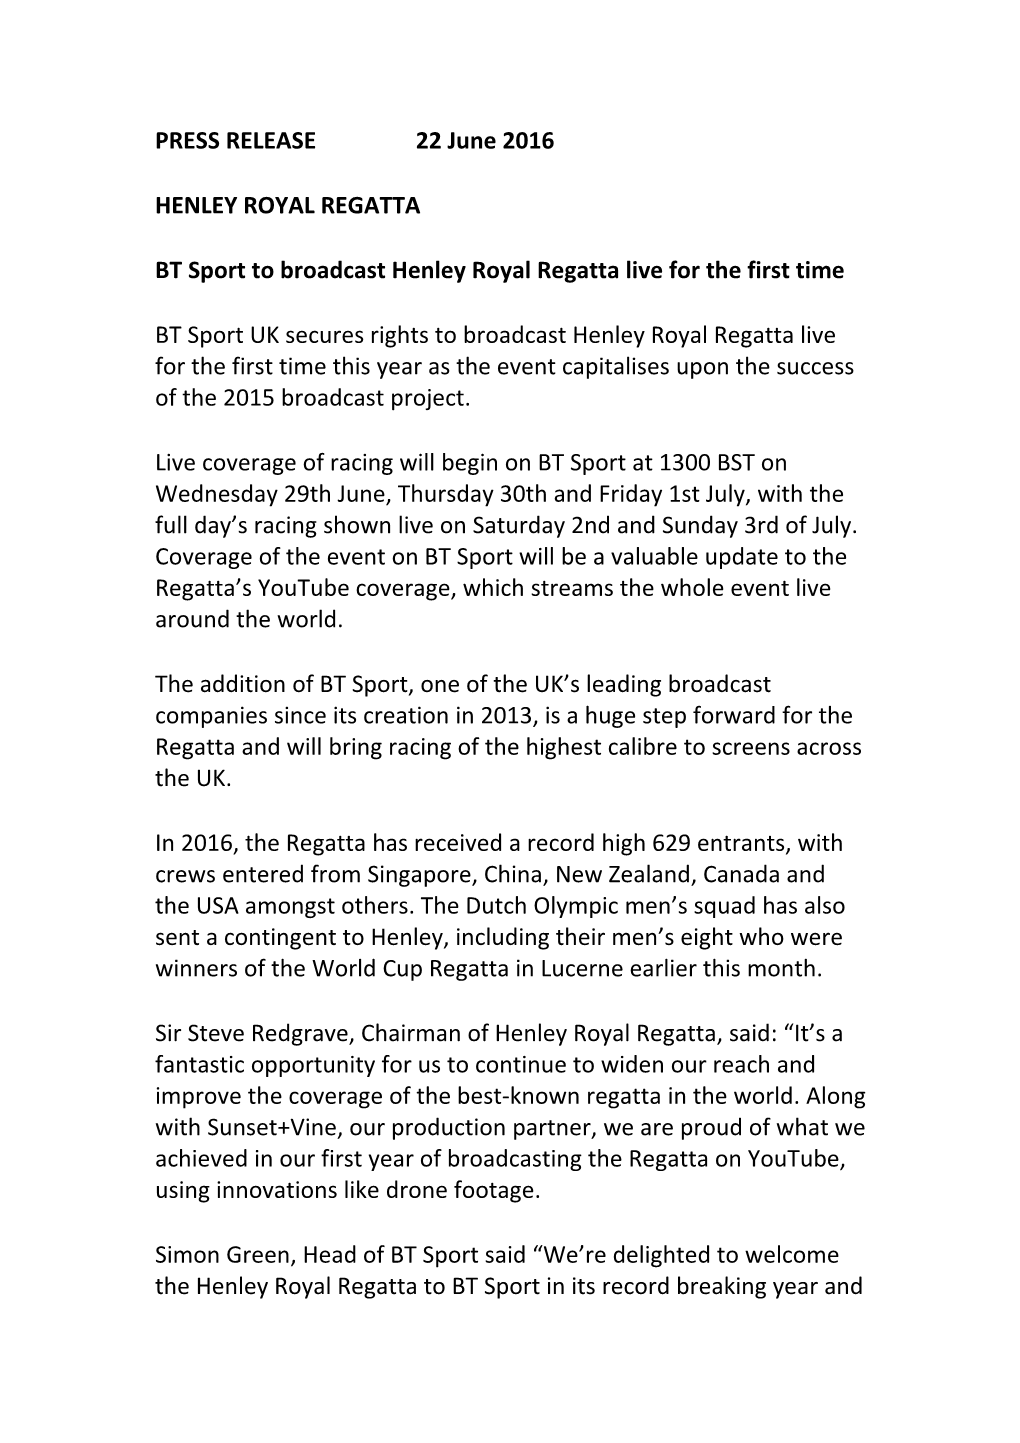 BT Sport to Broadcast Henley Royal Regatta Live for the First Time